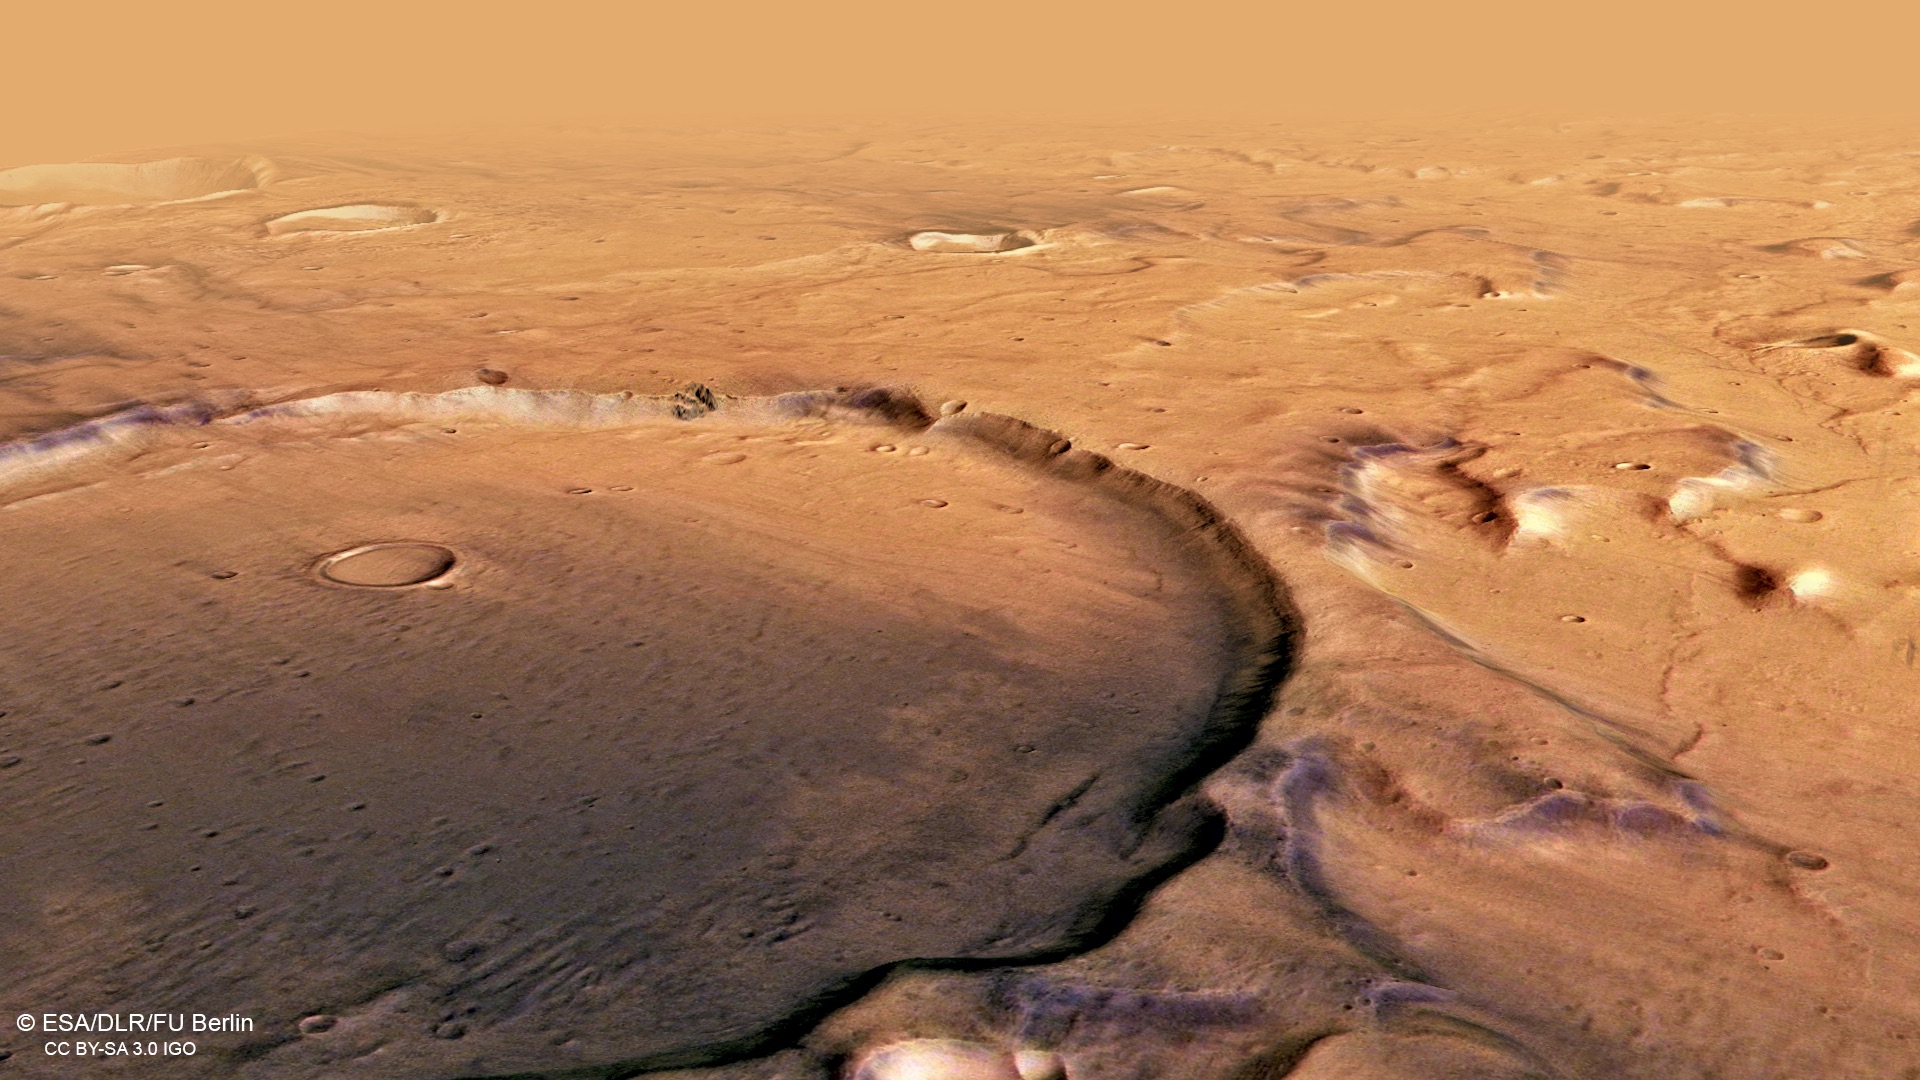 Planet Mars. New INCREDIBLE Pictures have STUNNED ALL HUMANITY terra cimmeria